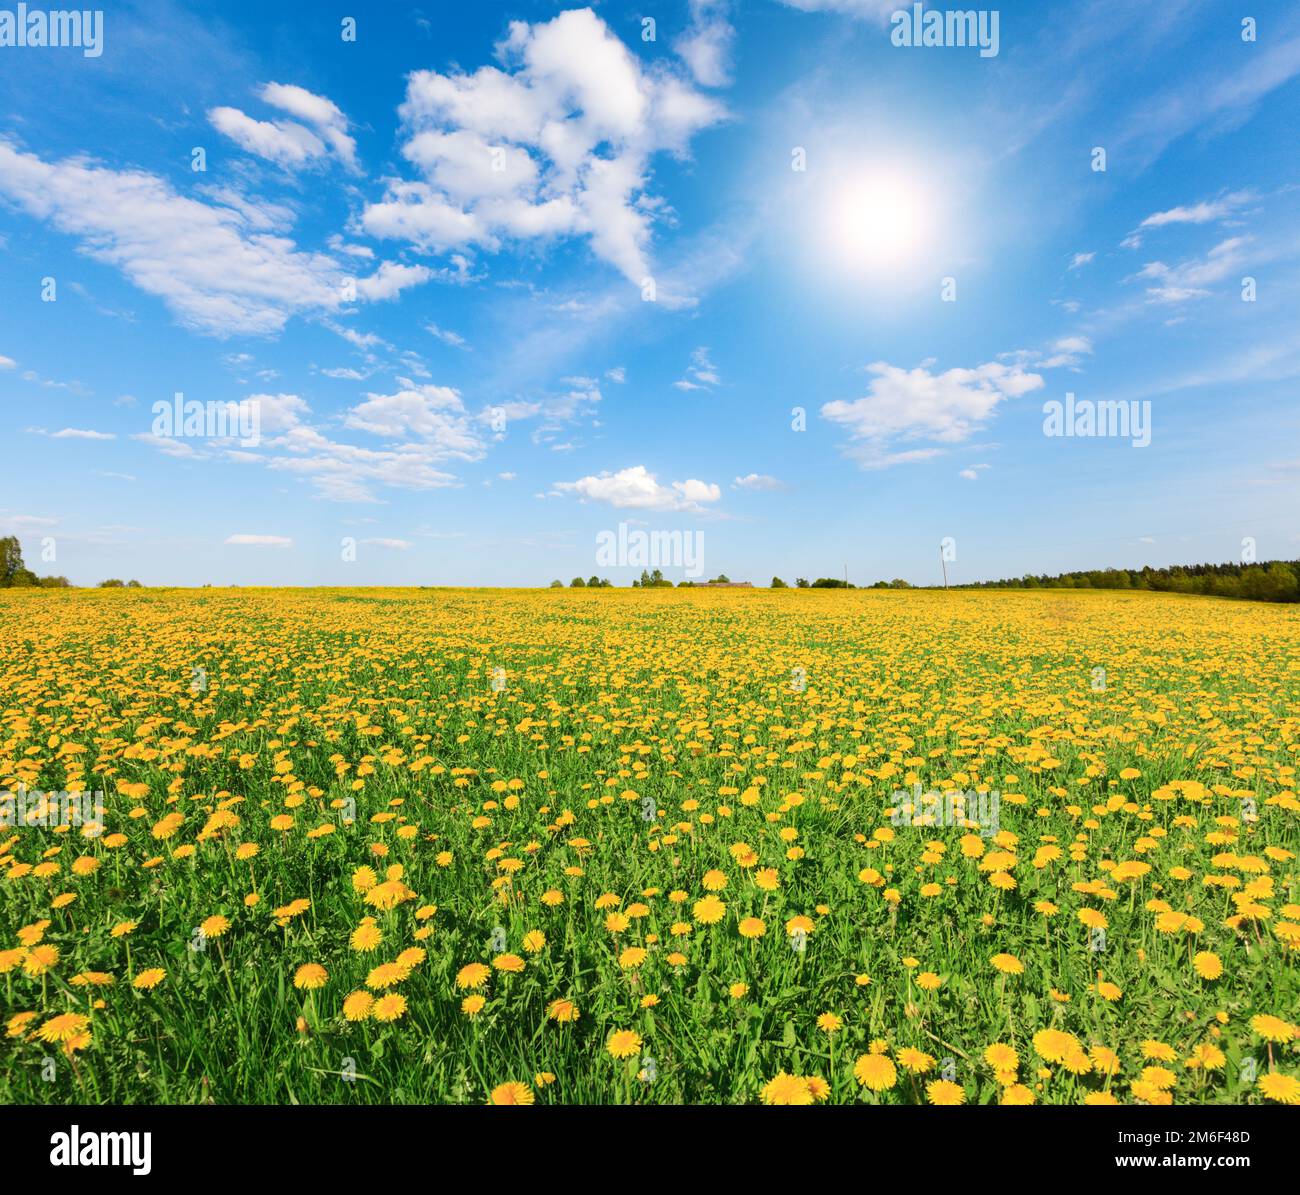 Yellow flowers hill under blue cloudy sky with sun Stock Photo